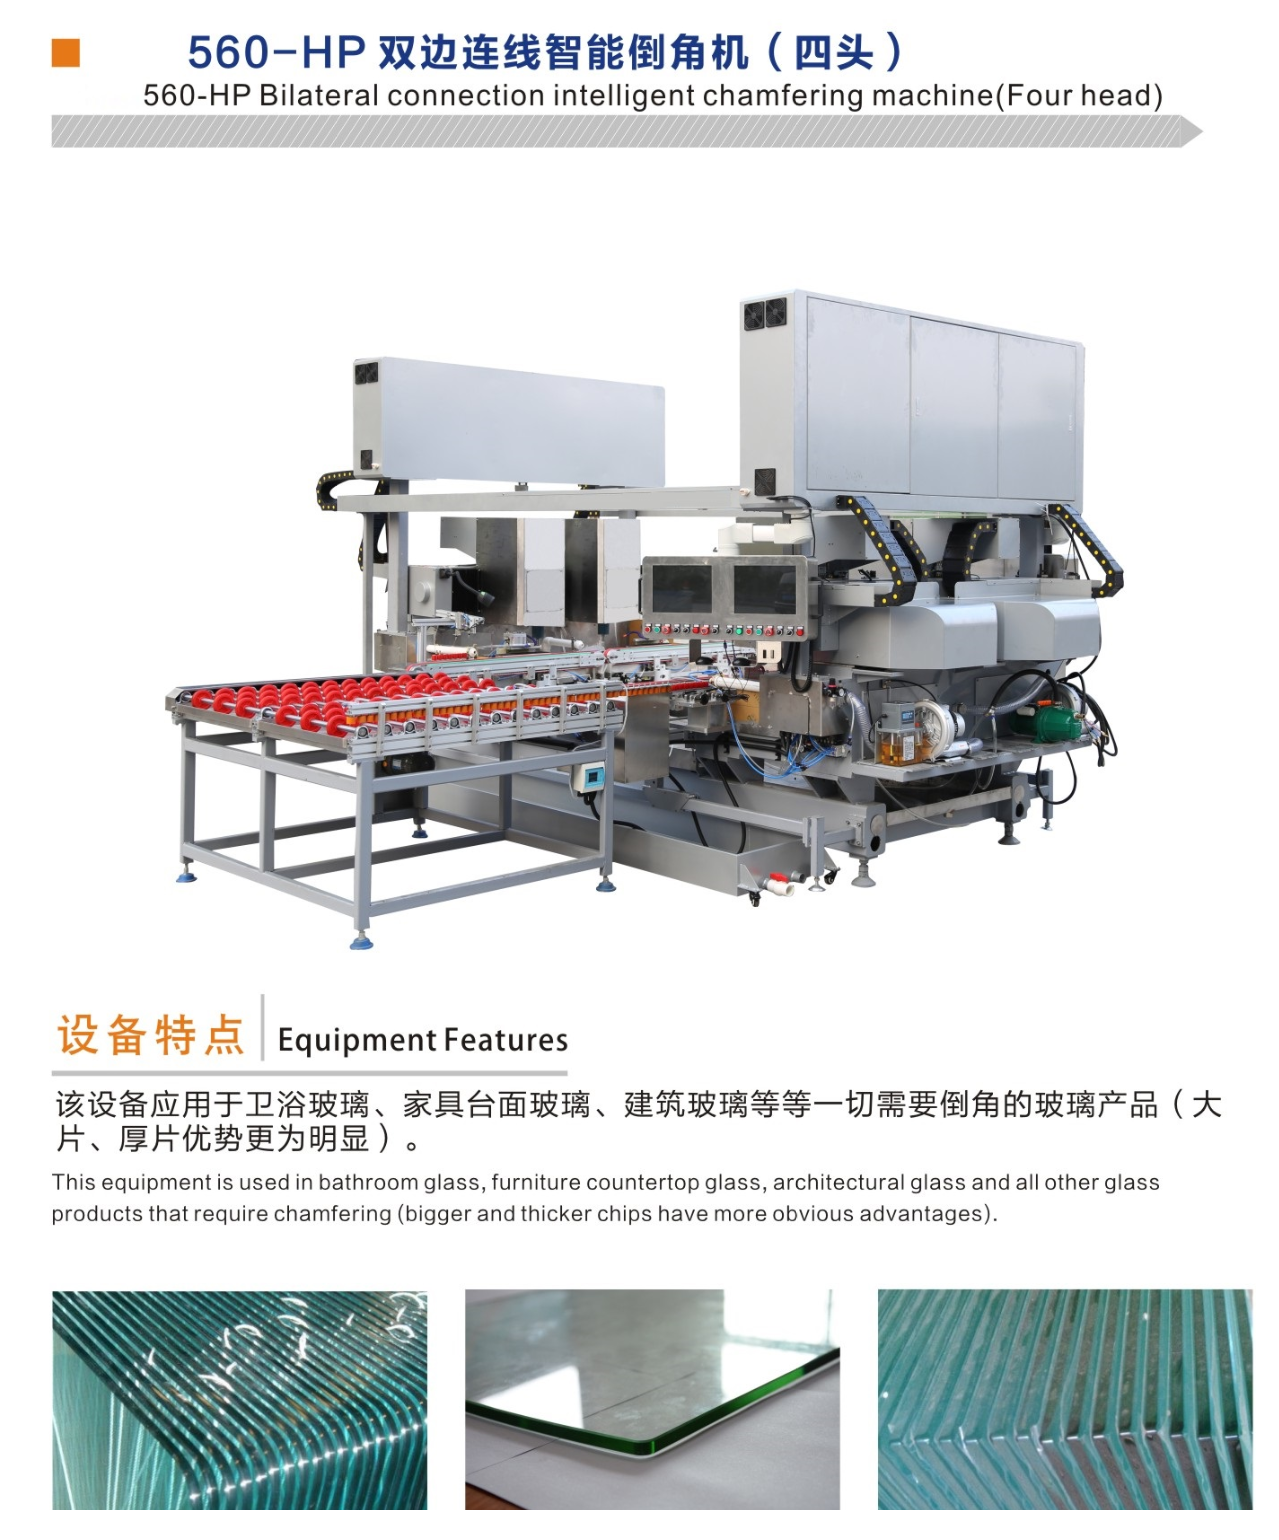 Wholesale Dealers of Glass Double Edging Machine -
 Four Head CNC Glass Corner Grinding Machine,CNC Glass Corner Grinding Machine – Saint Best